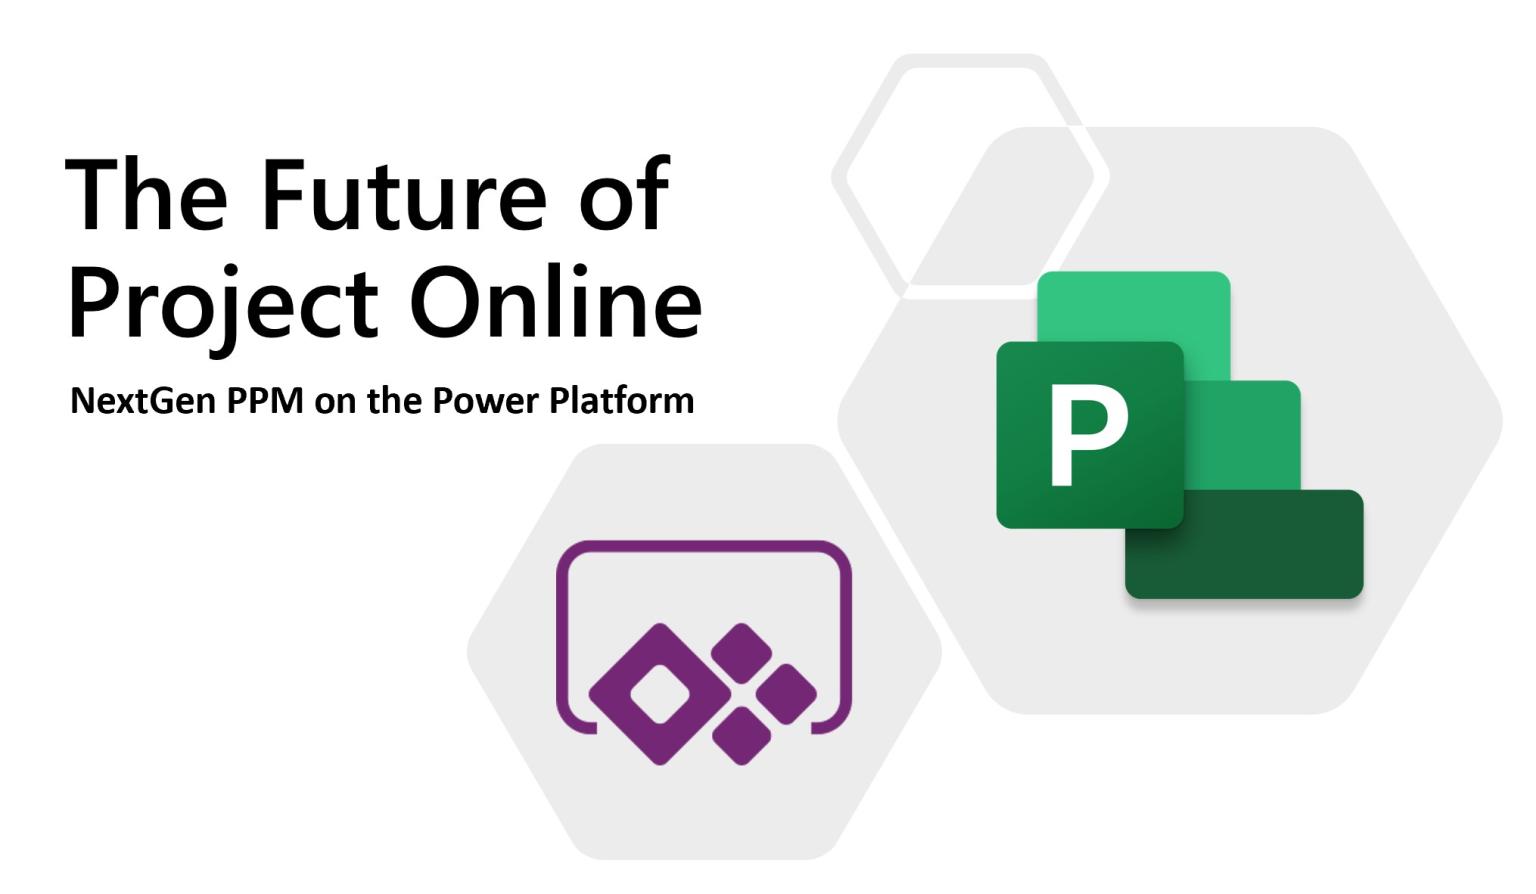 The Future of Project Online